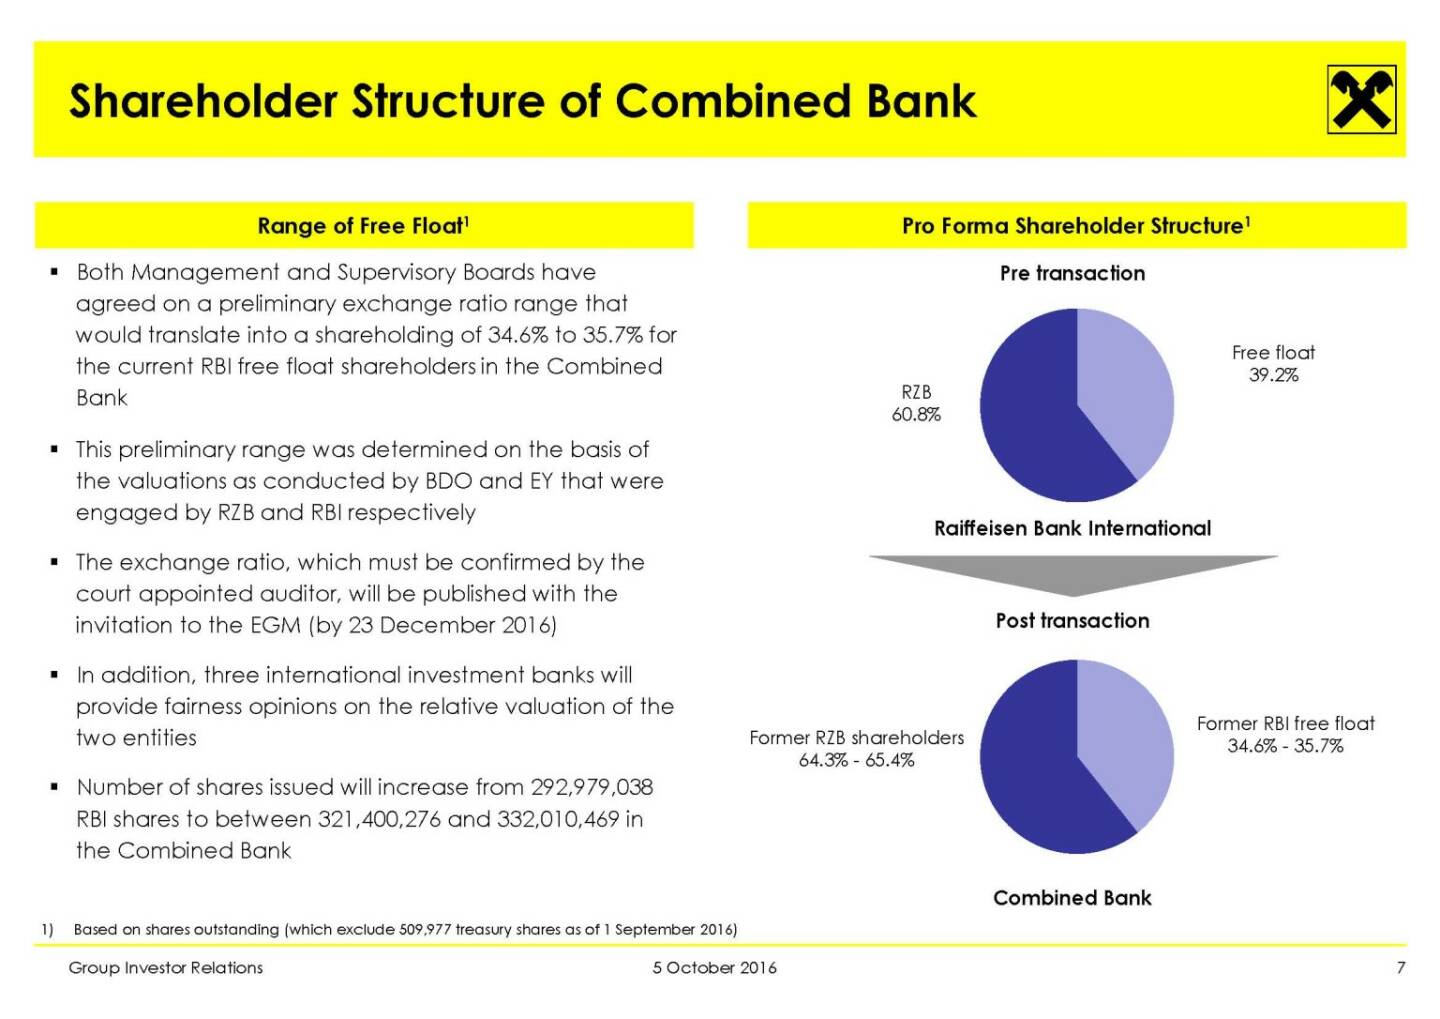 RBI - Shareholder Structure of Combined Bank